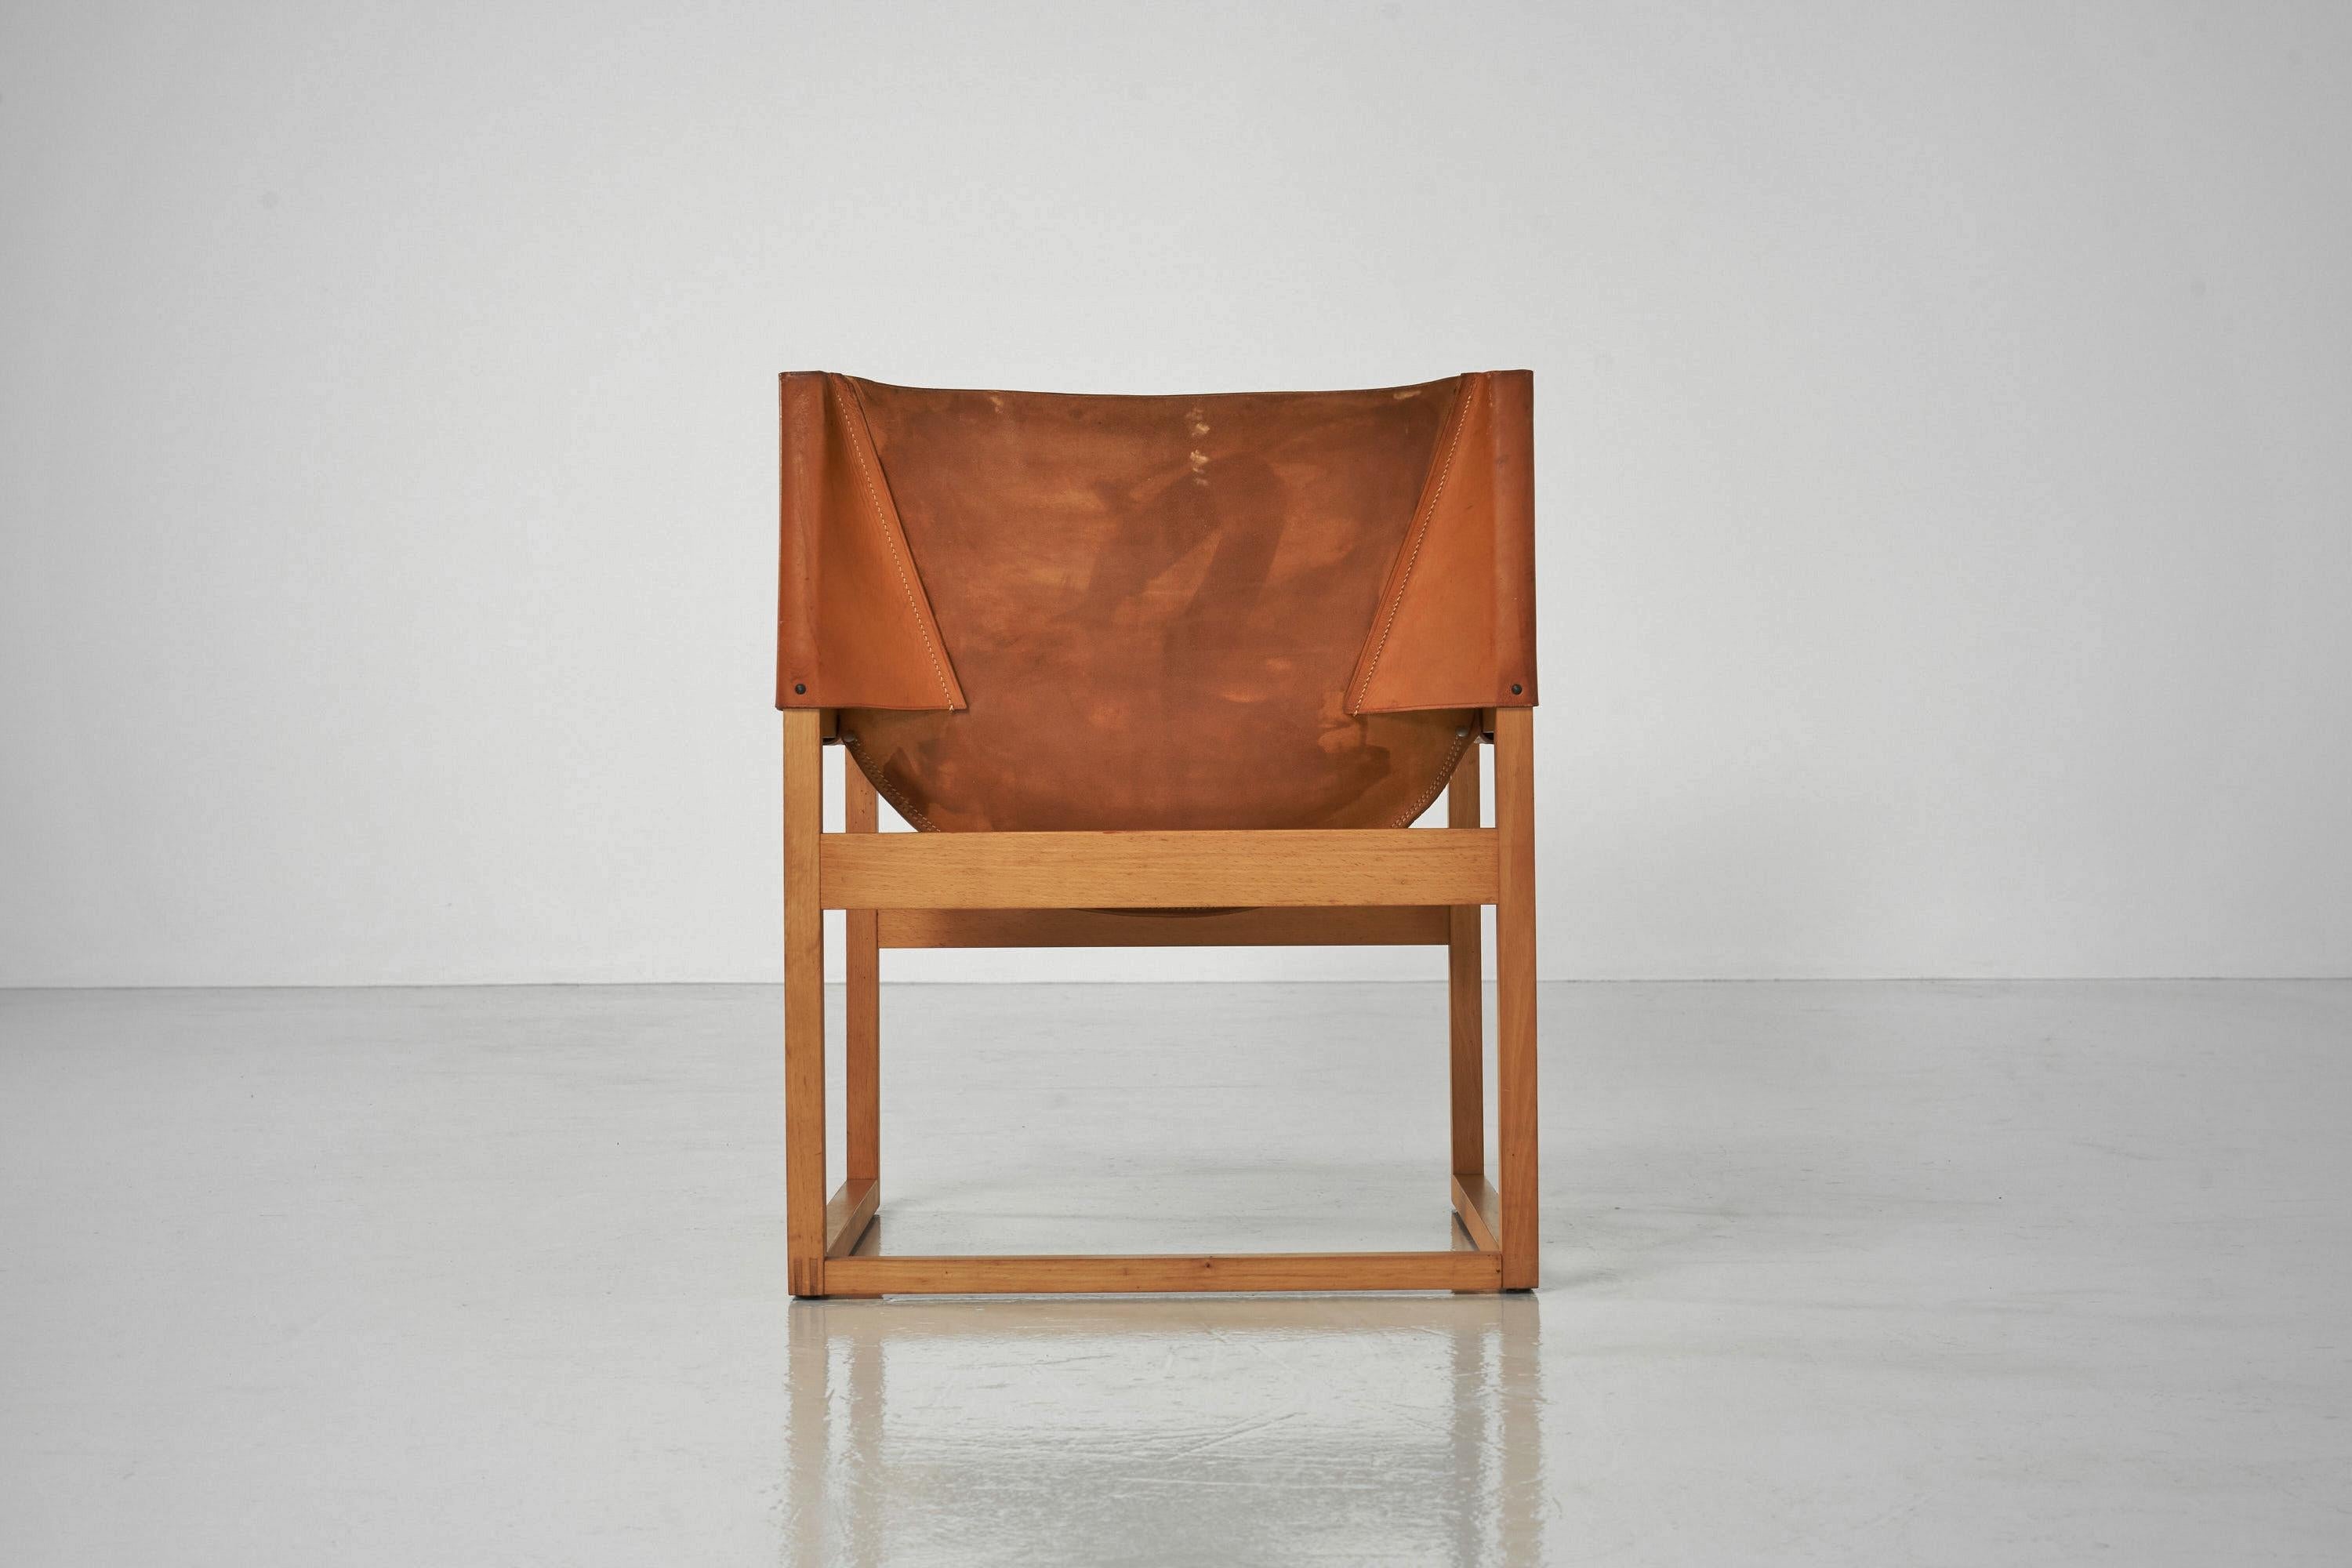 Rainer Schell Canto chair for Franz Schlapp, Germany, 1964 For Sale 4